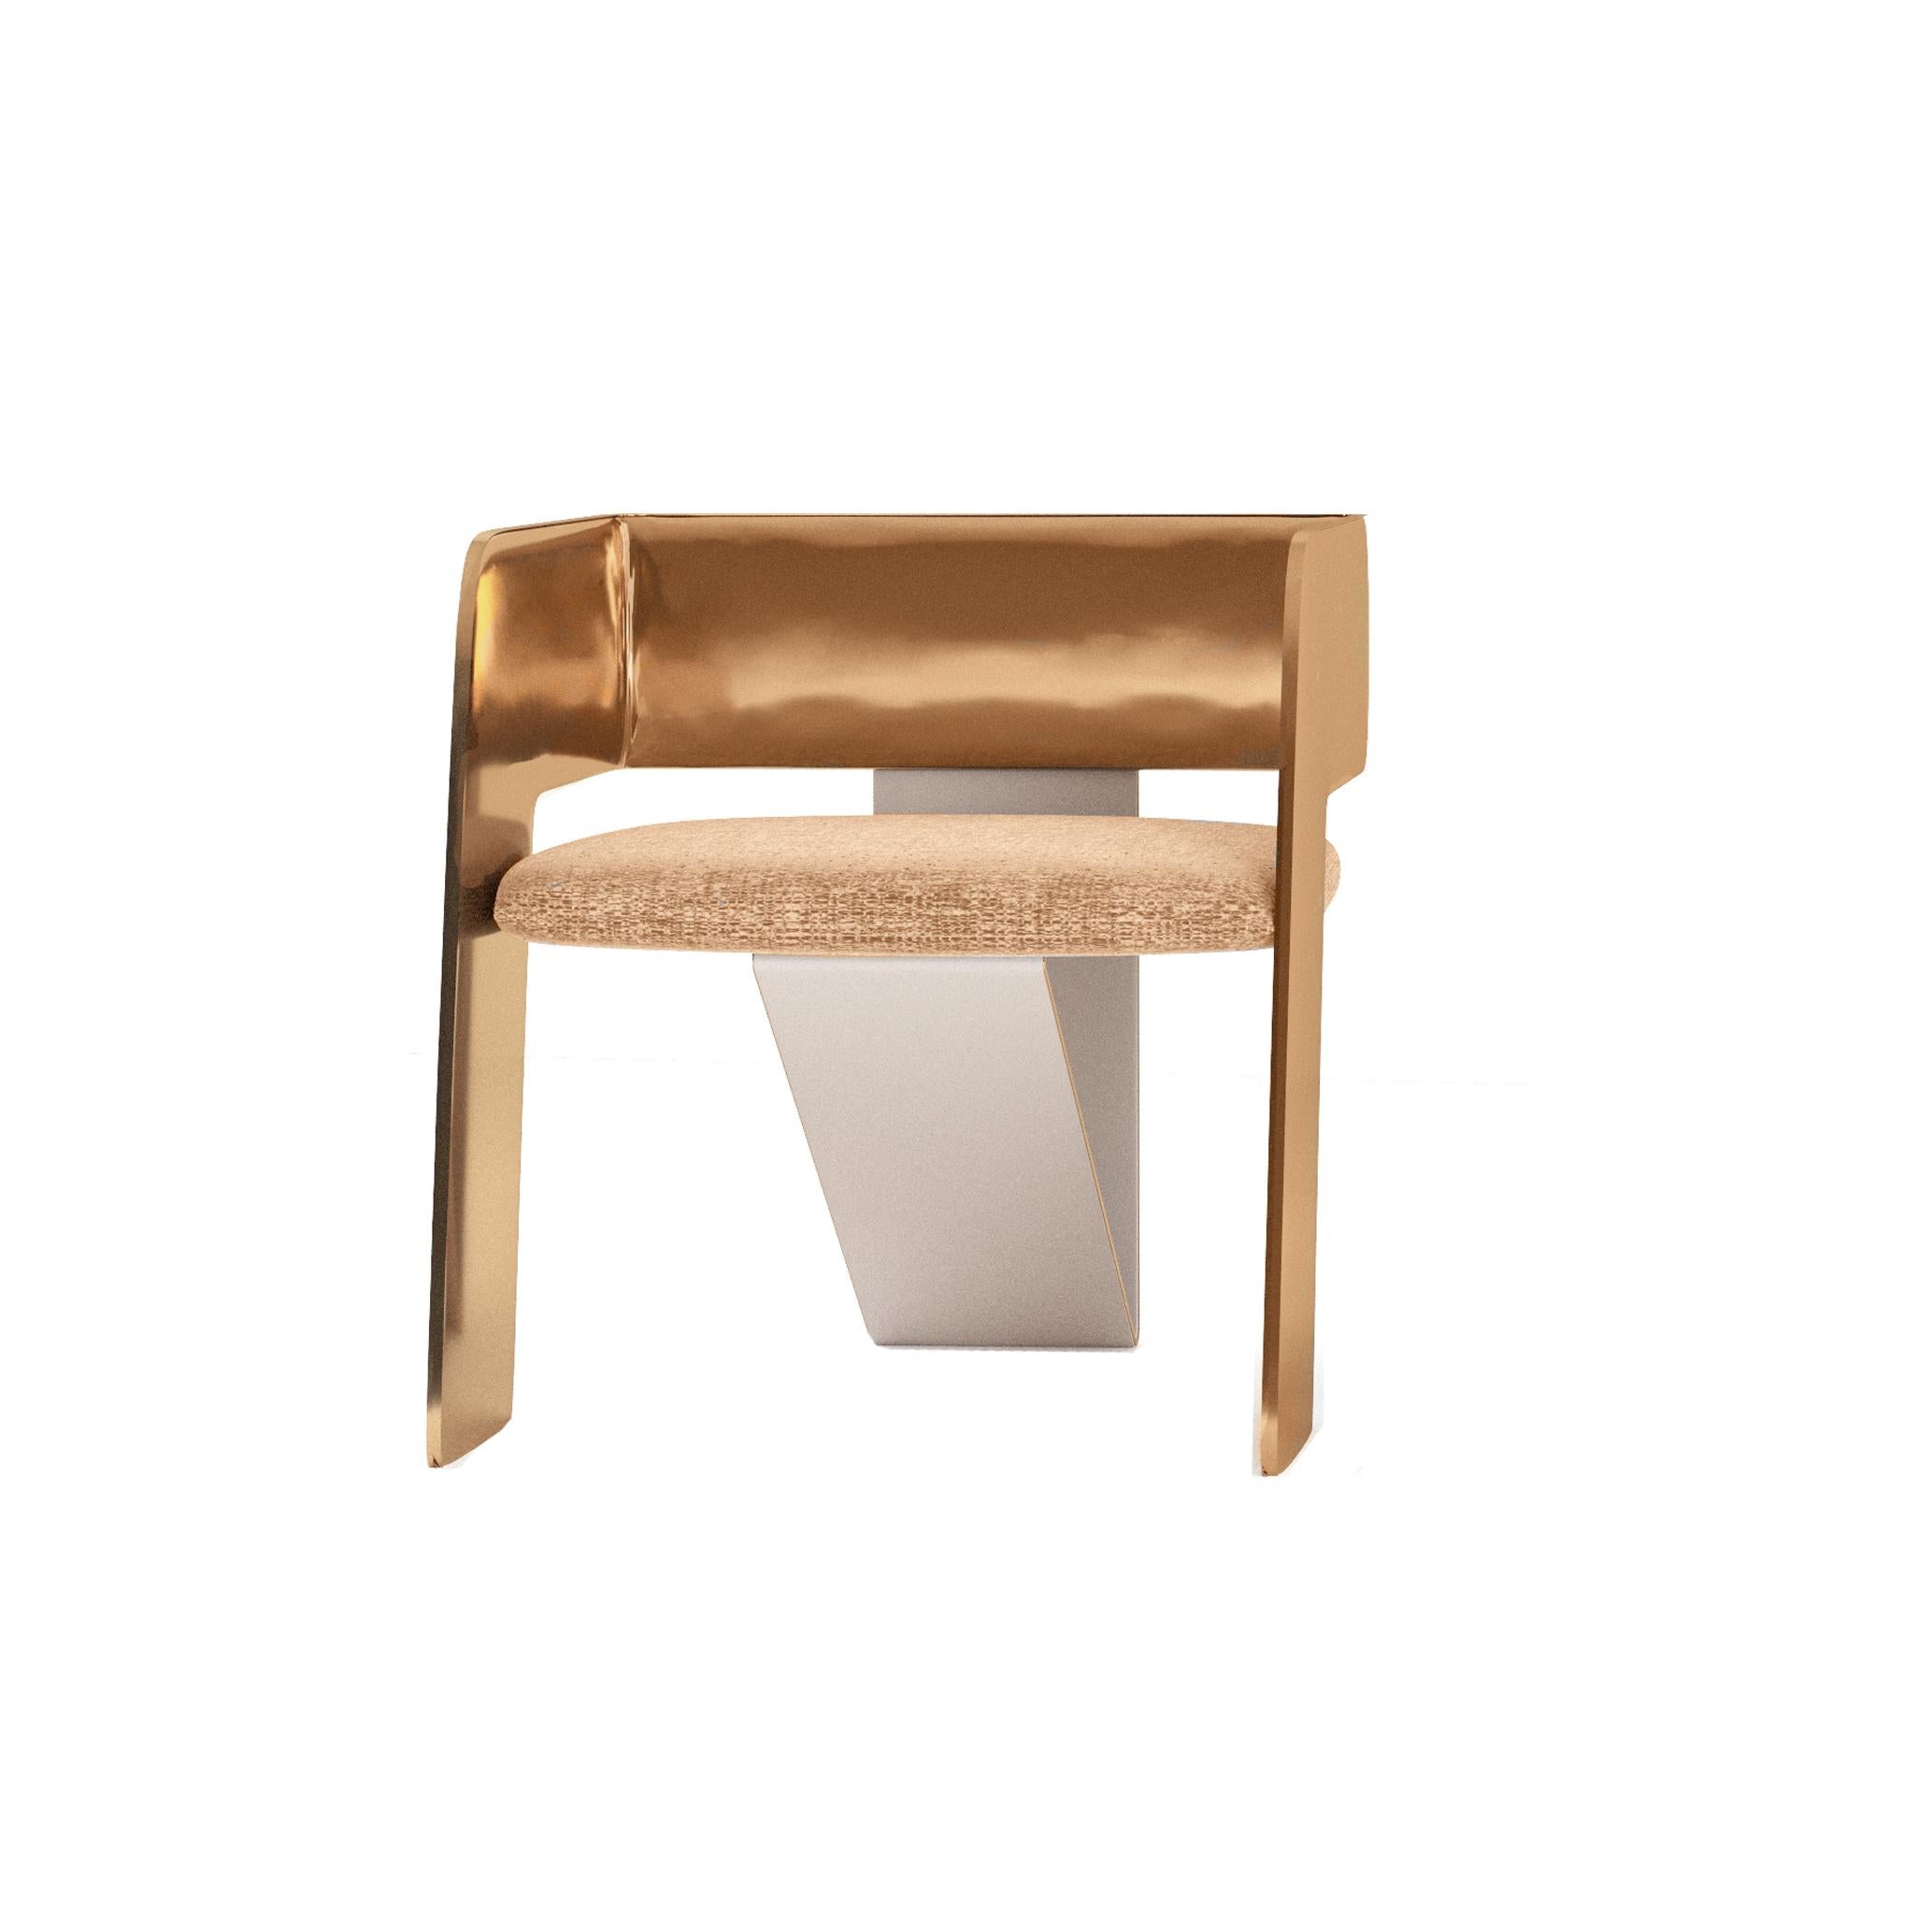 Russian Modern Gold Brass Futura Chair by Alter Ego Studio For Sale